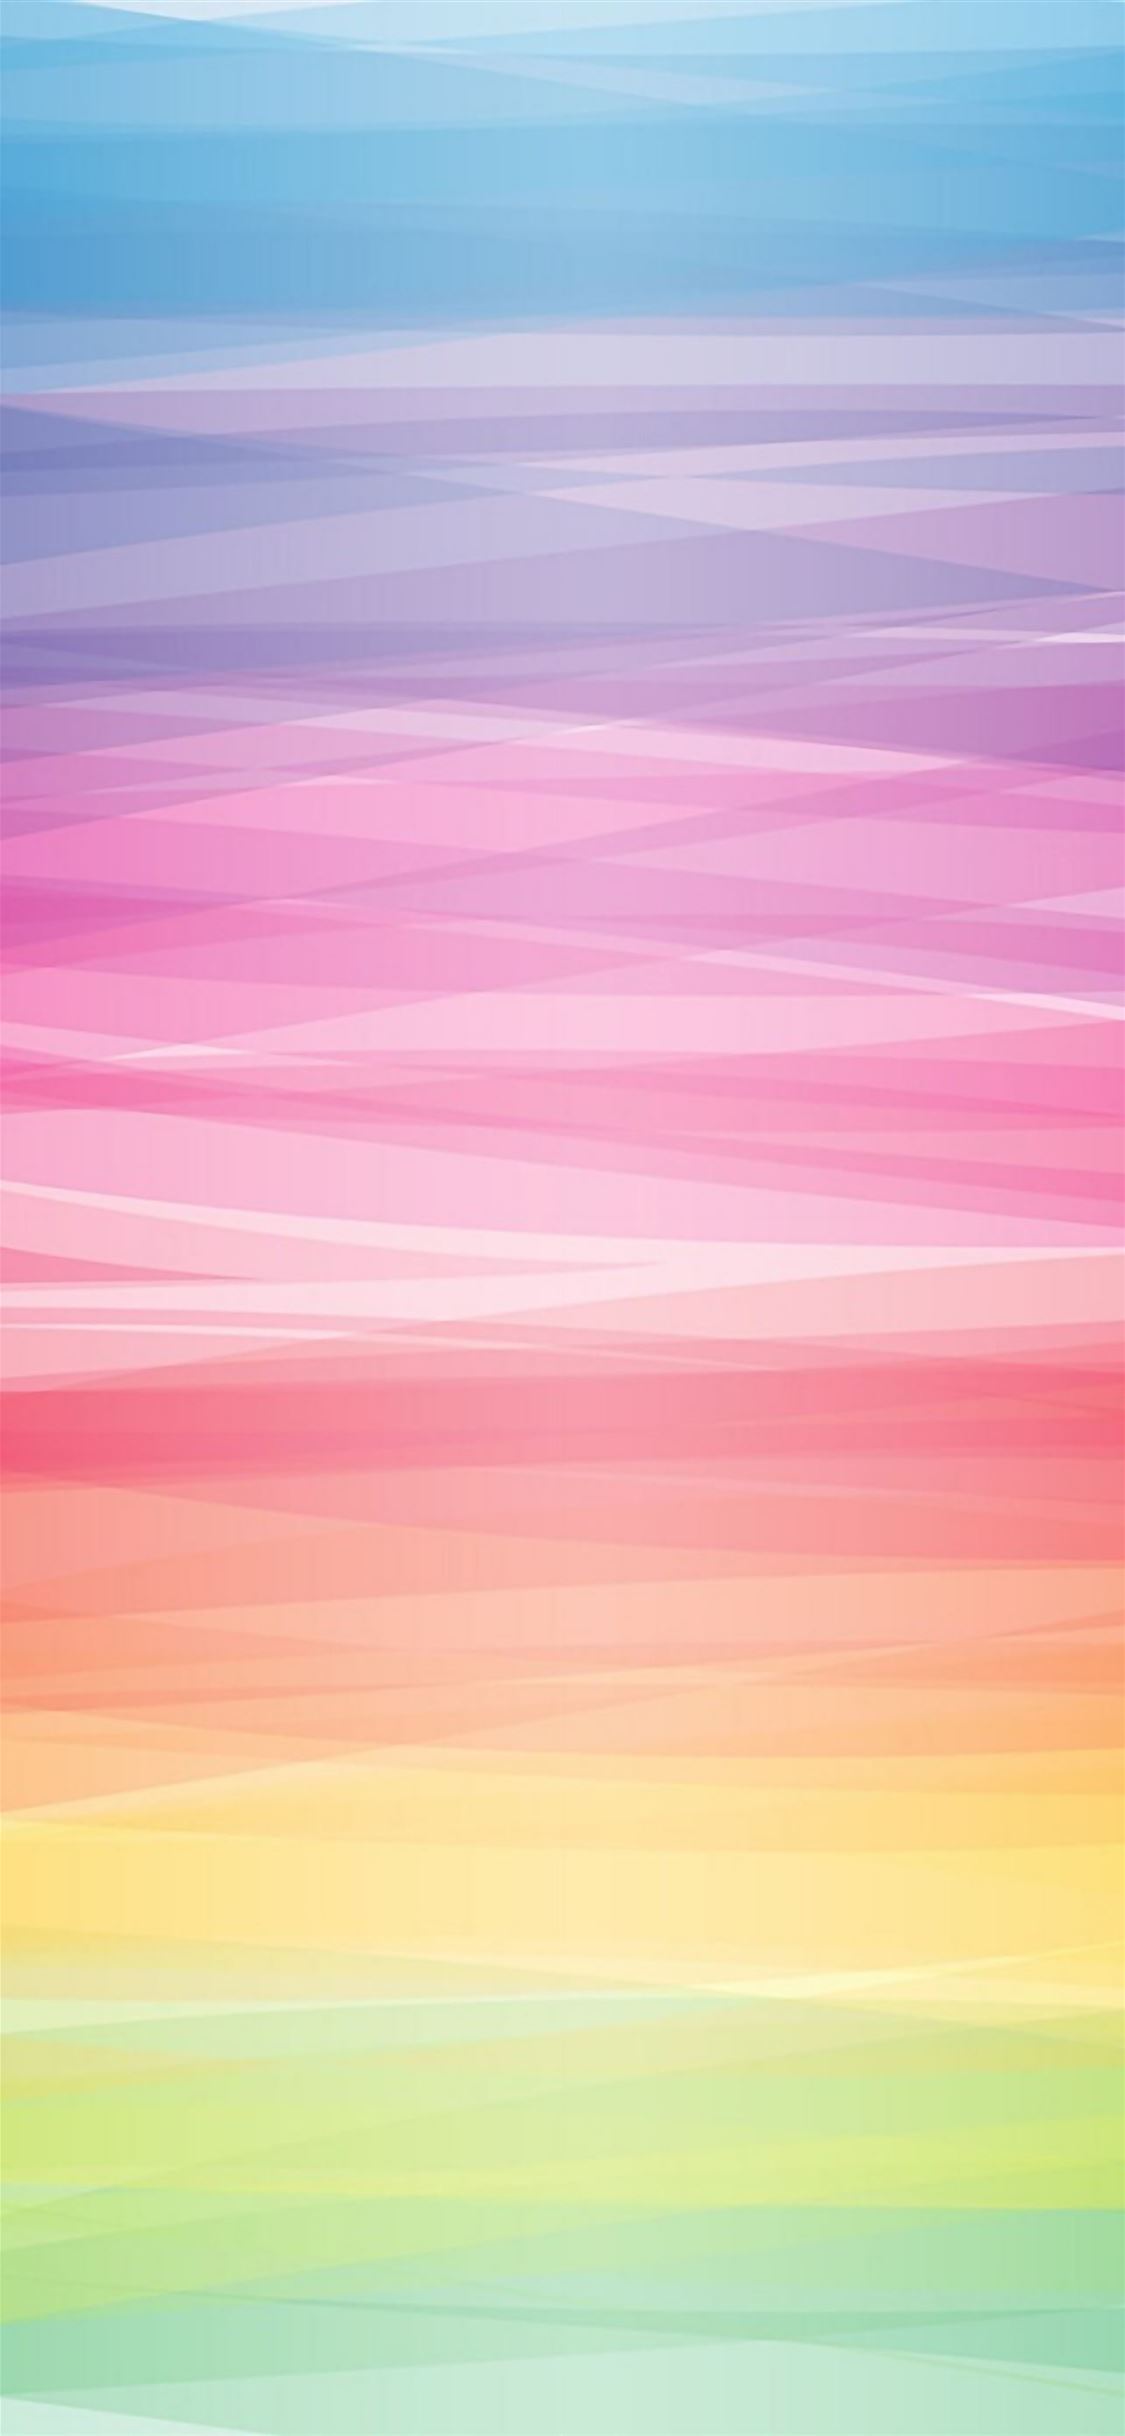 Pastel Colorful Smooth Lines iPhone wallpaper 